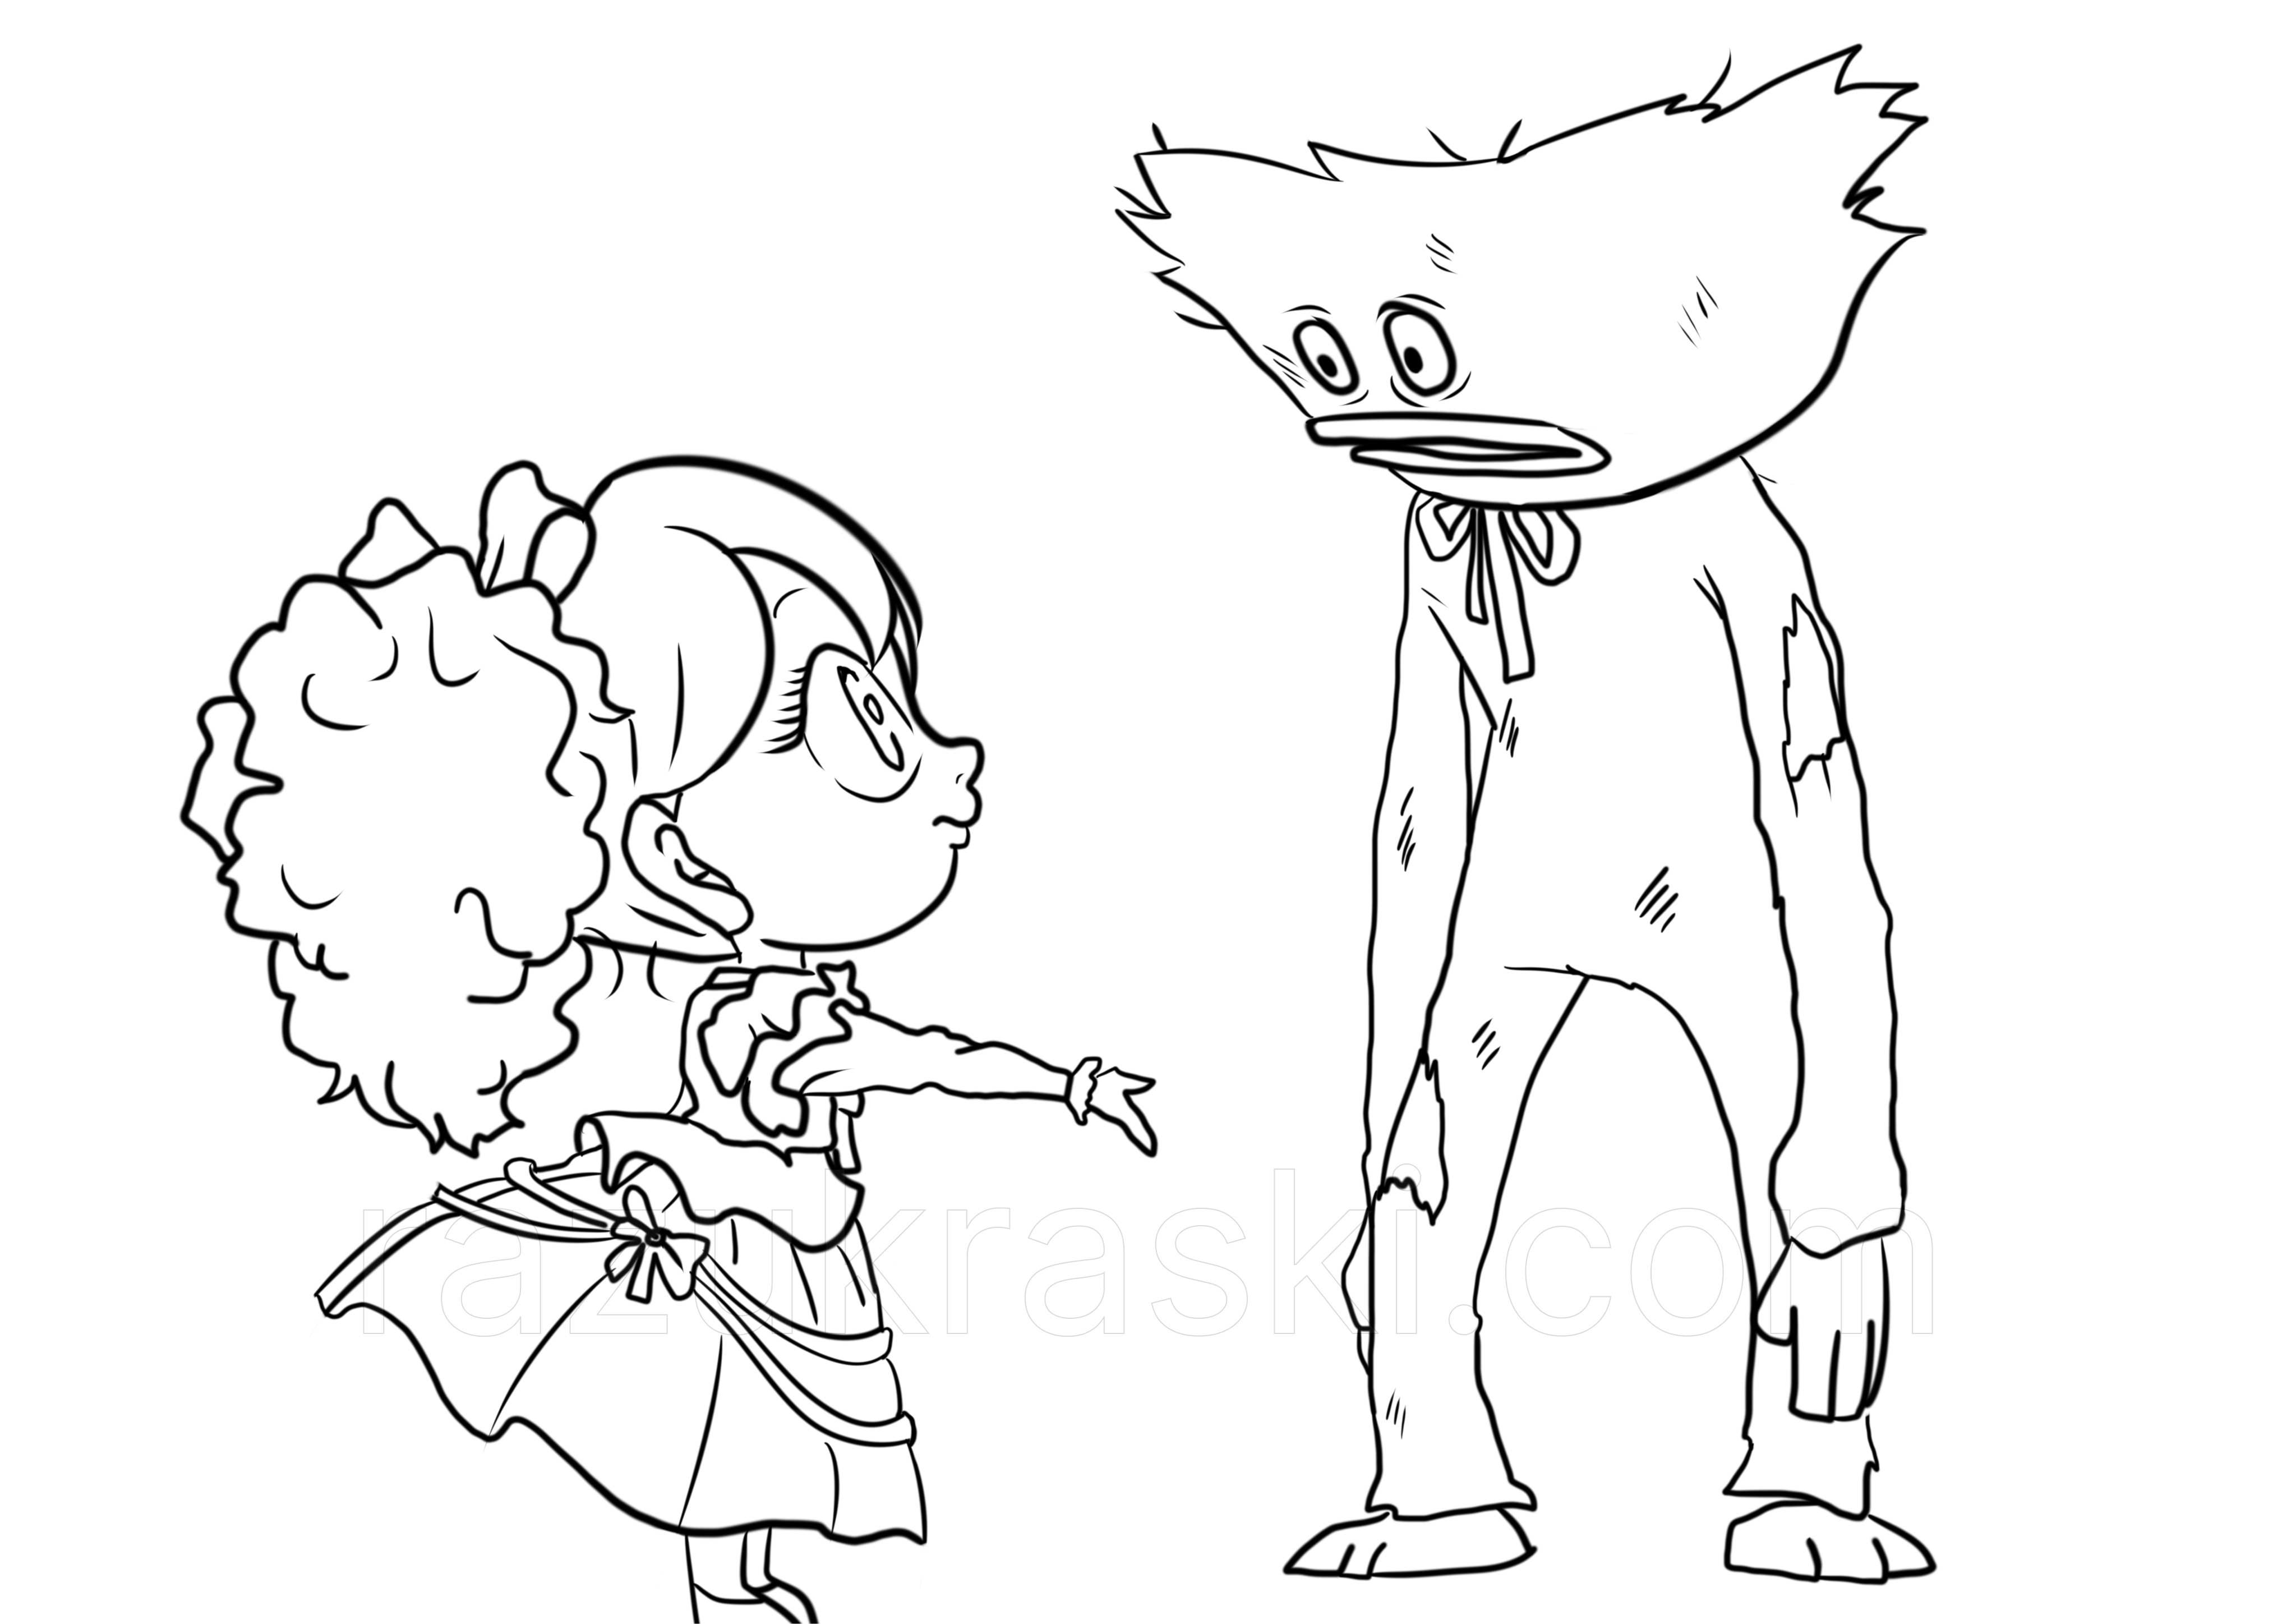 Coloring page Huggy Wuggy getting to know a girl